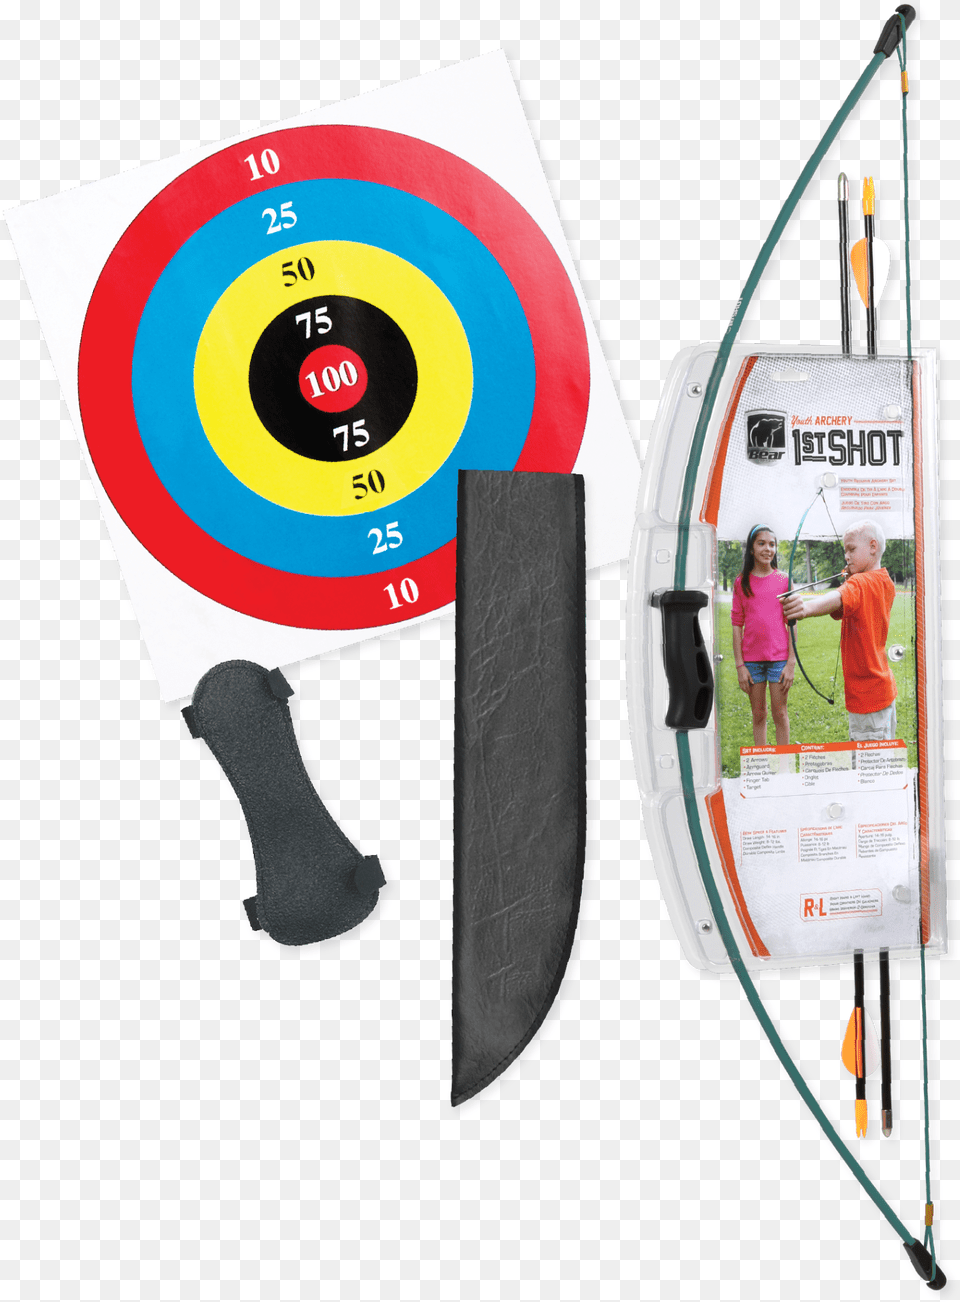 Bear Archery 1st Shot Youth Bow Set Includes Arrows, Weapon, Sport, Boy, Child Png Image